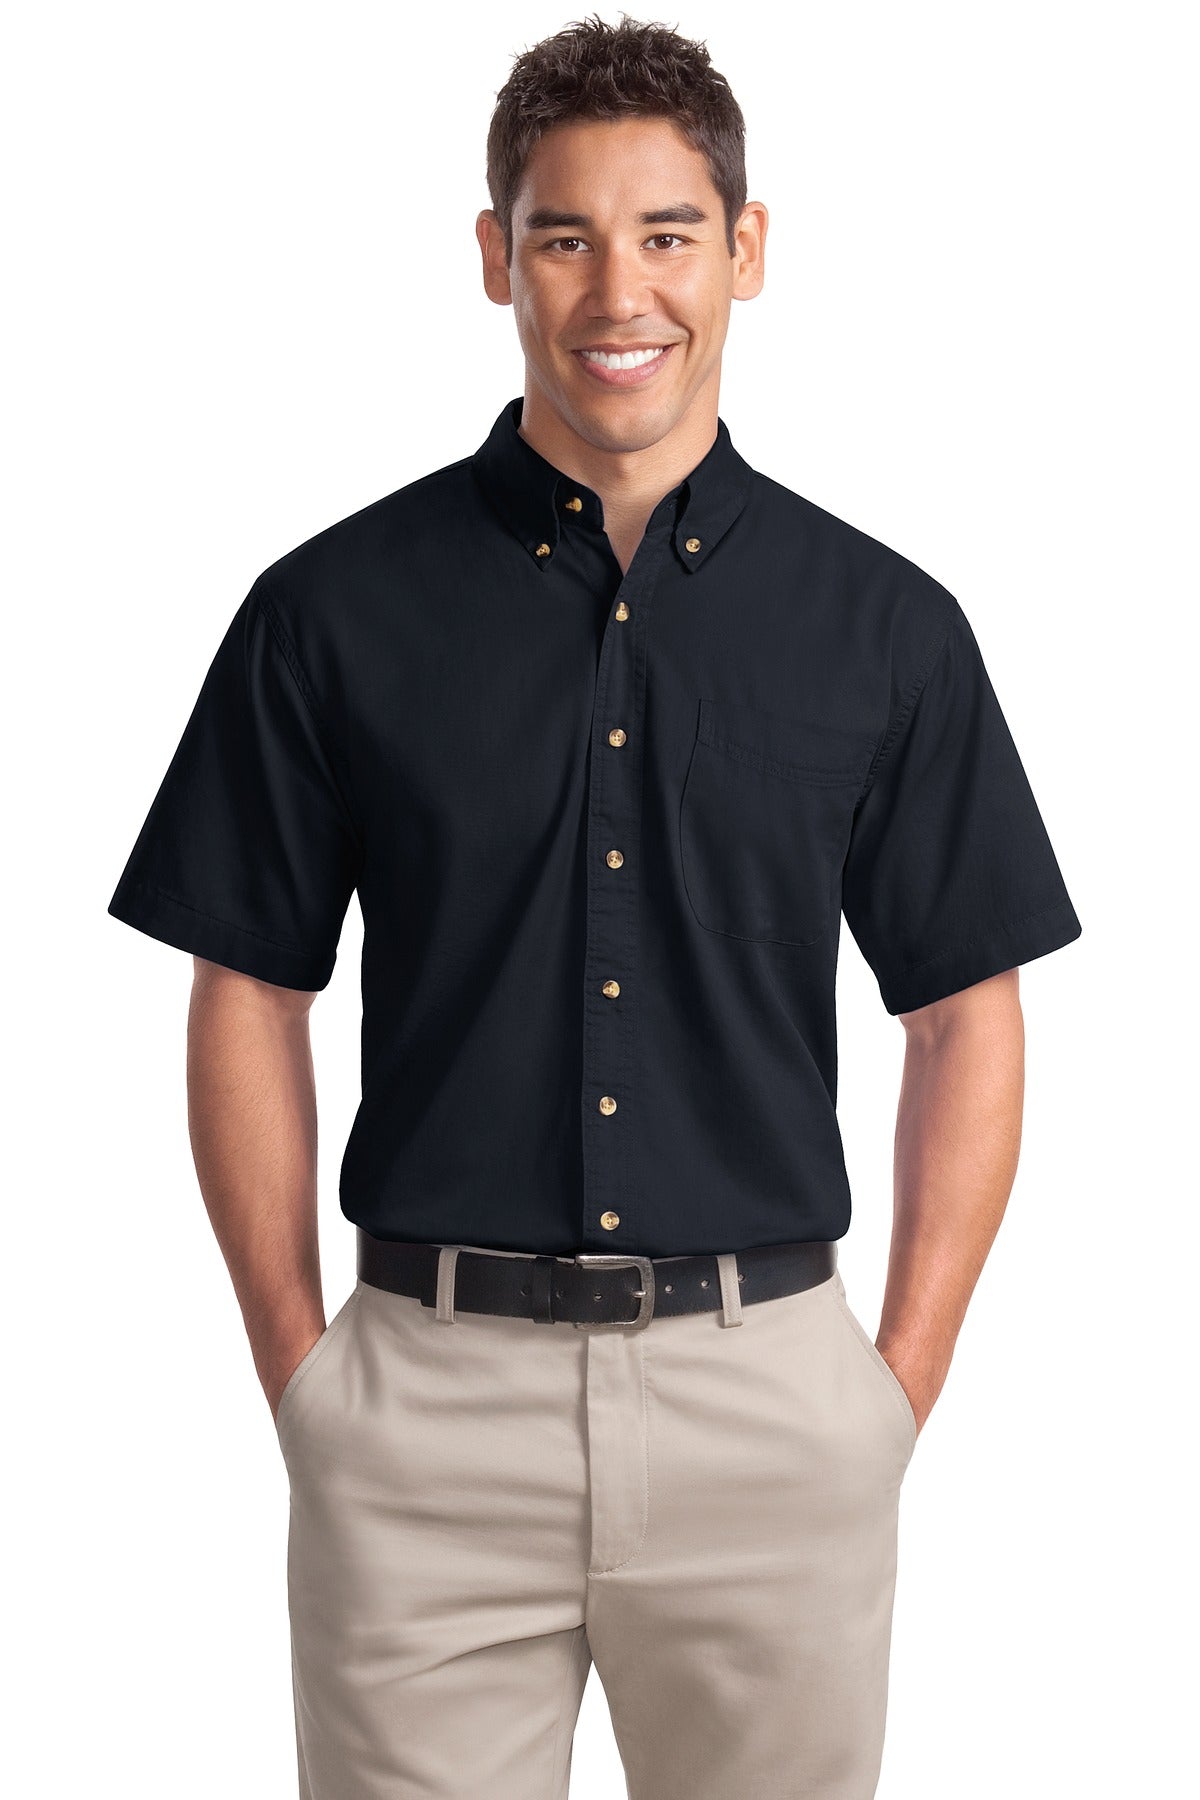 Woven Shirts Classic Navy Port Authority